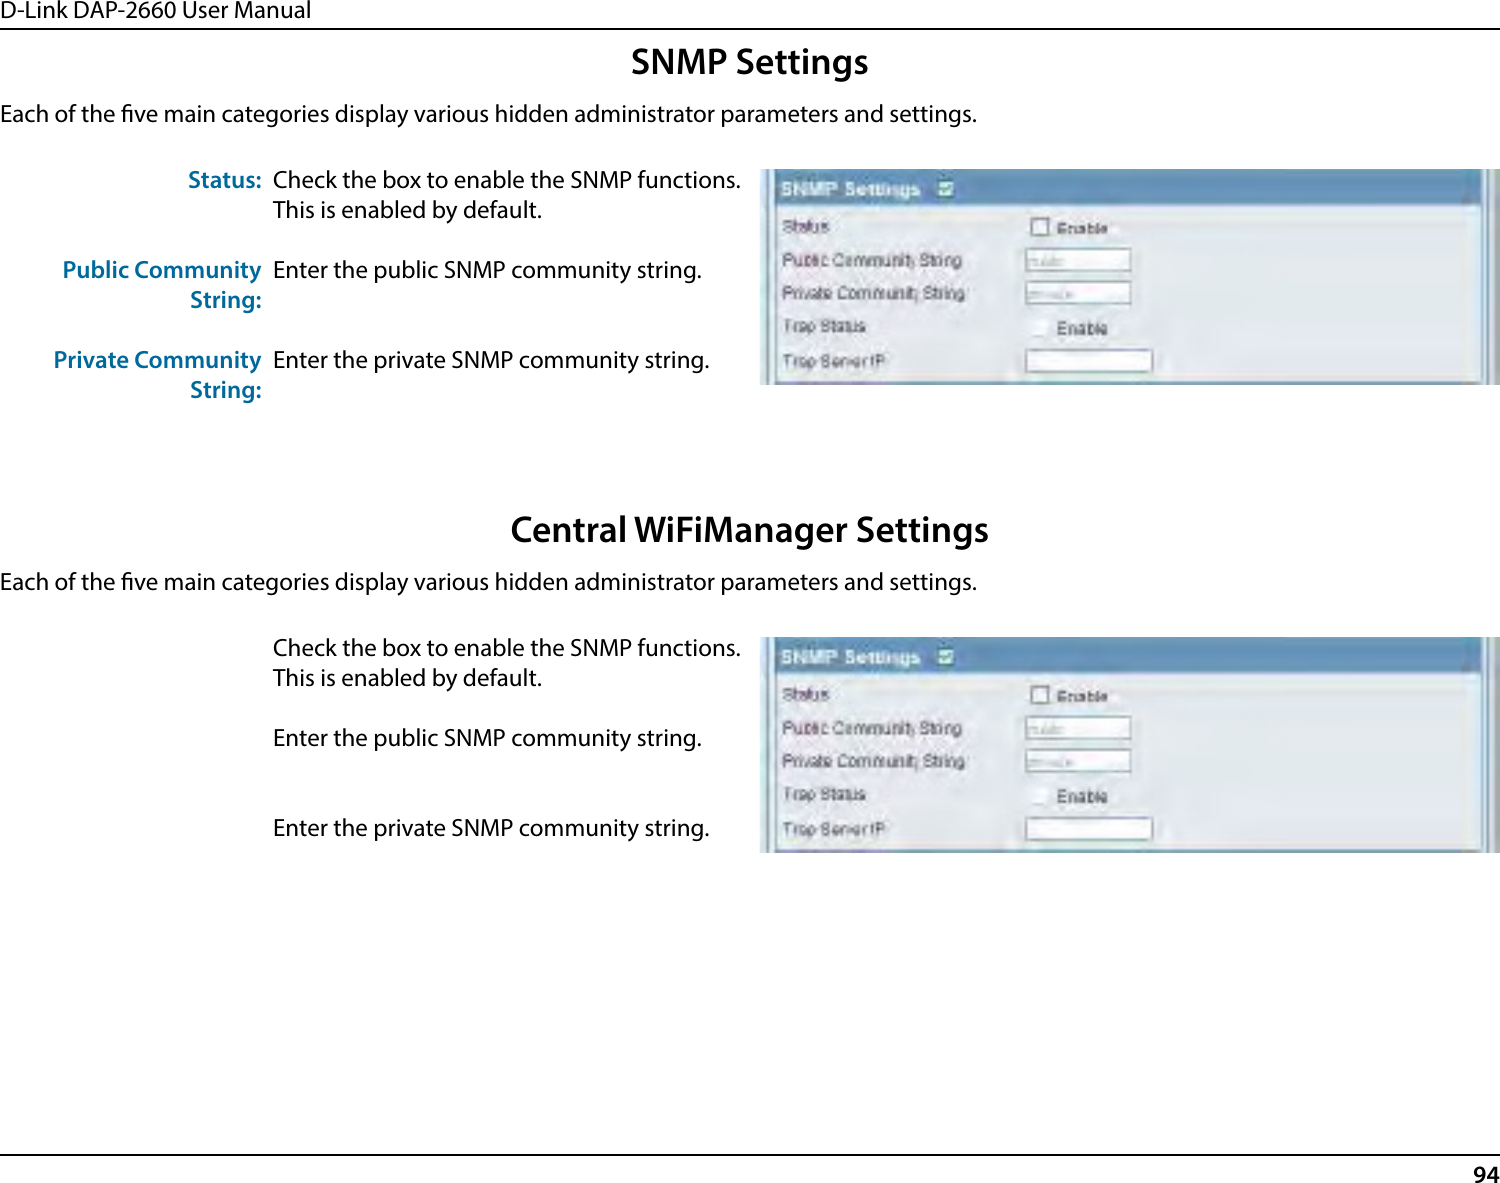 D-Link DAP-2660 User Manual94SNMP SettingsEach of the ve main categories display various hidden administrator parameters and settings.Status:Public Community String:Private Community String:Check the box to enable the SNMP functions. This is enabled by default.Enter the public SNMP community string.Enter the private SNMP community string.Central WiFiManager SettingsEach of the ve main categories display various hidden administrator parameters and settings.Check the box to enable the SNMP functions. This is enabled by default.Enter the public SNMP community string.Enter the private SNMP community string.